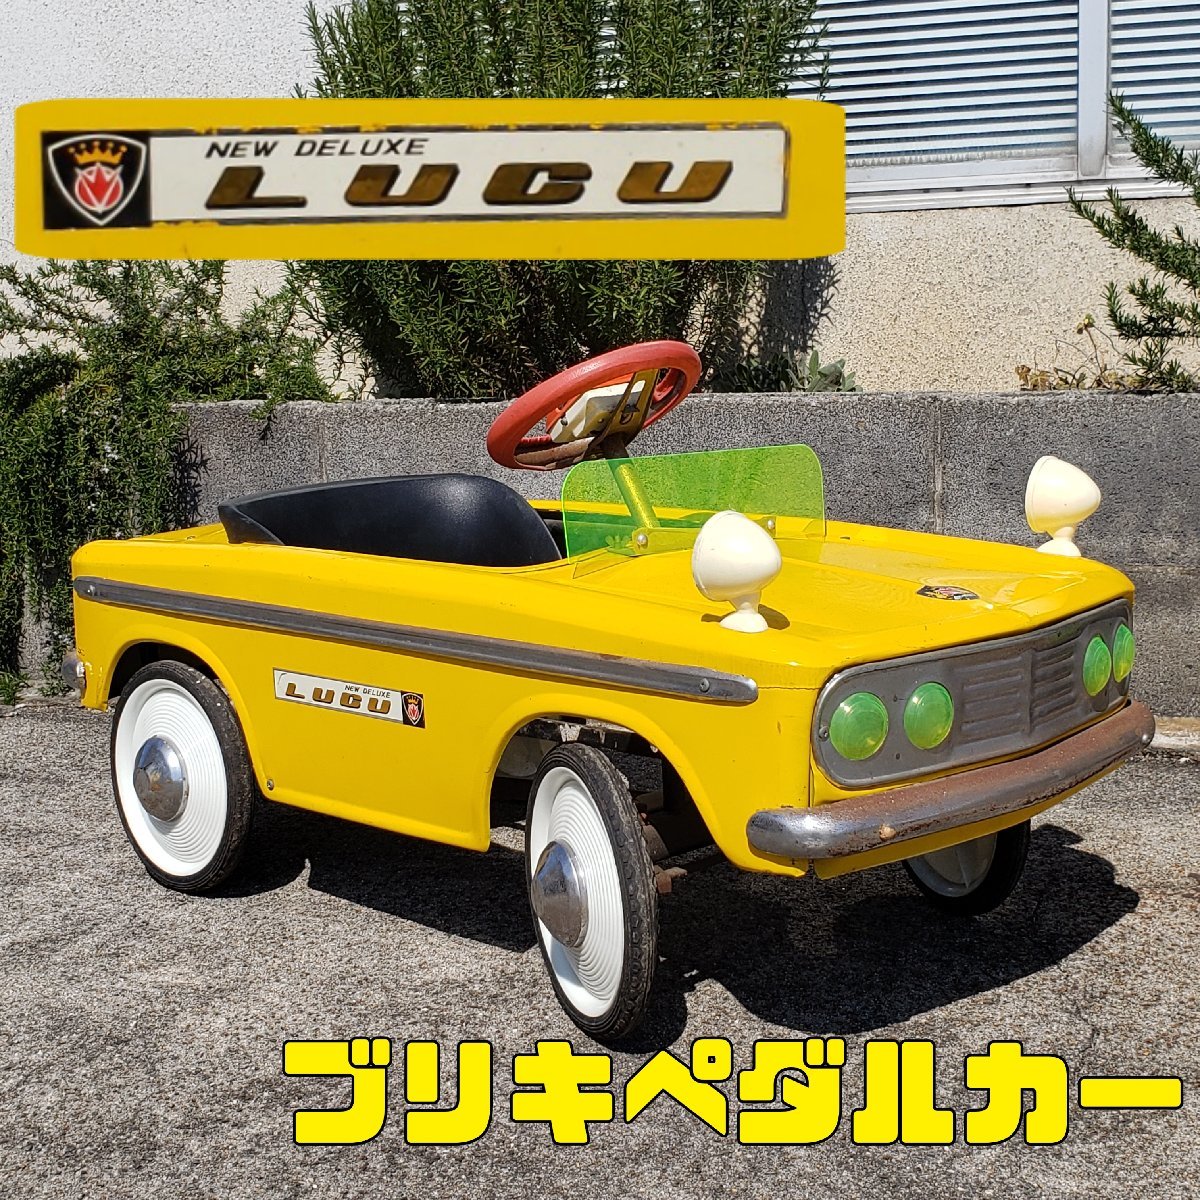  tin plate pedal car NEW DELUXE LUGU.7-53 tin plate pair .. pedal type toy for riding toy TOY car retro yellow that time thing [220e1800]